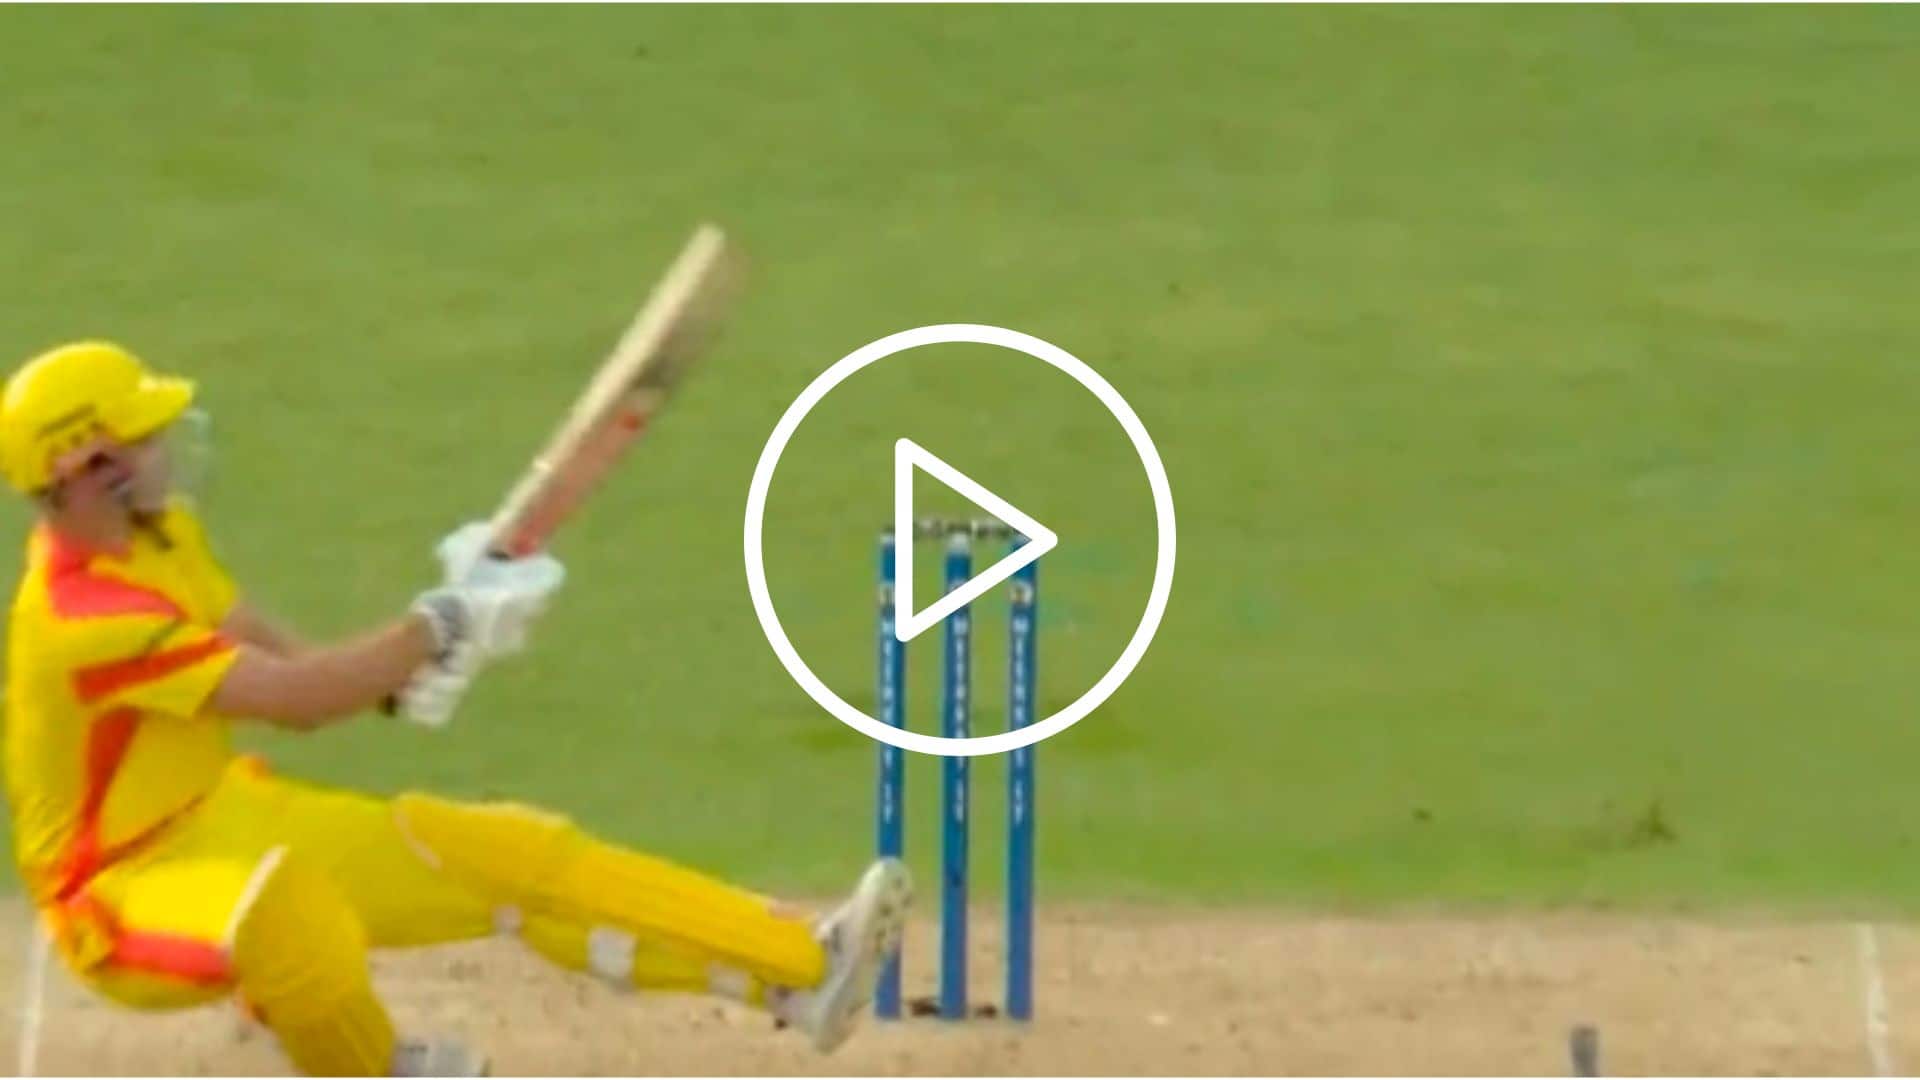 [Watch] Sam Hain Pulls Scoop Shot During His Blistering 39-Ball 63